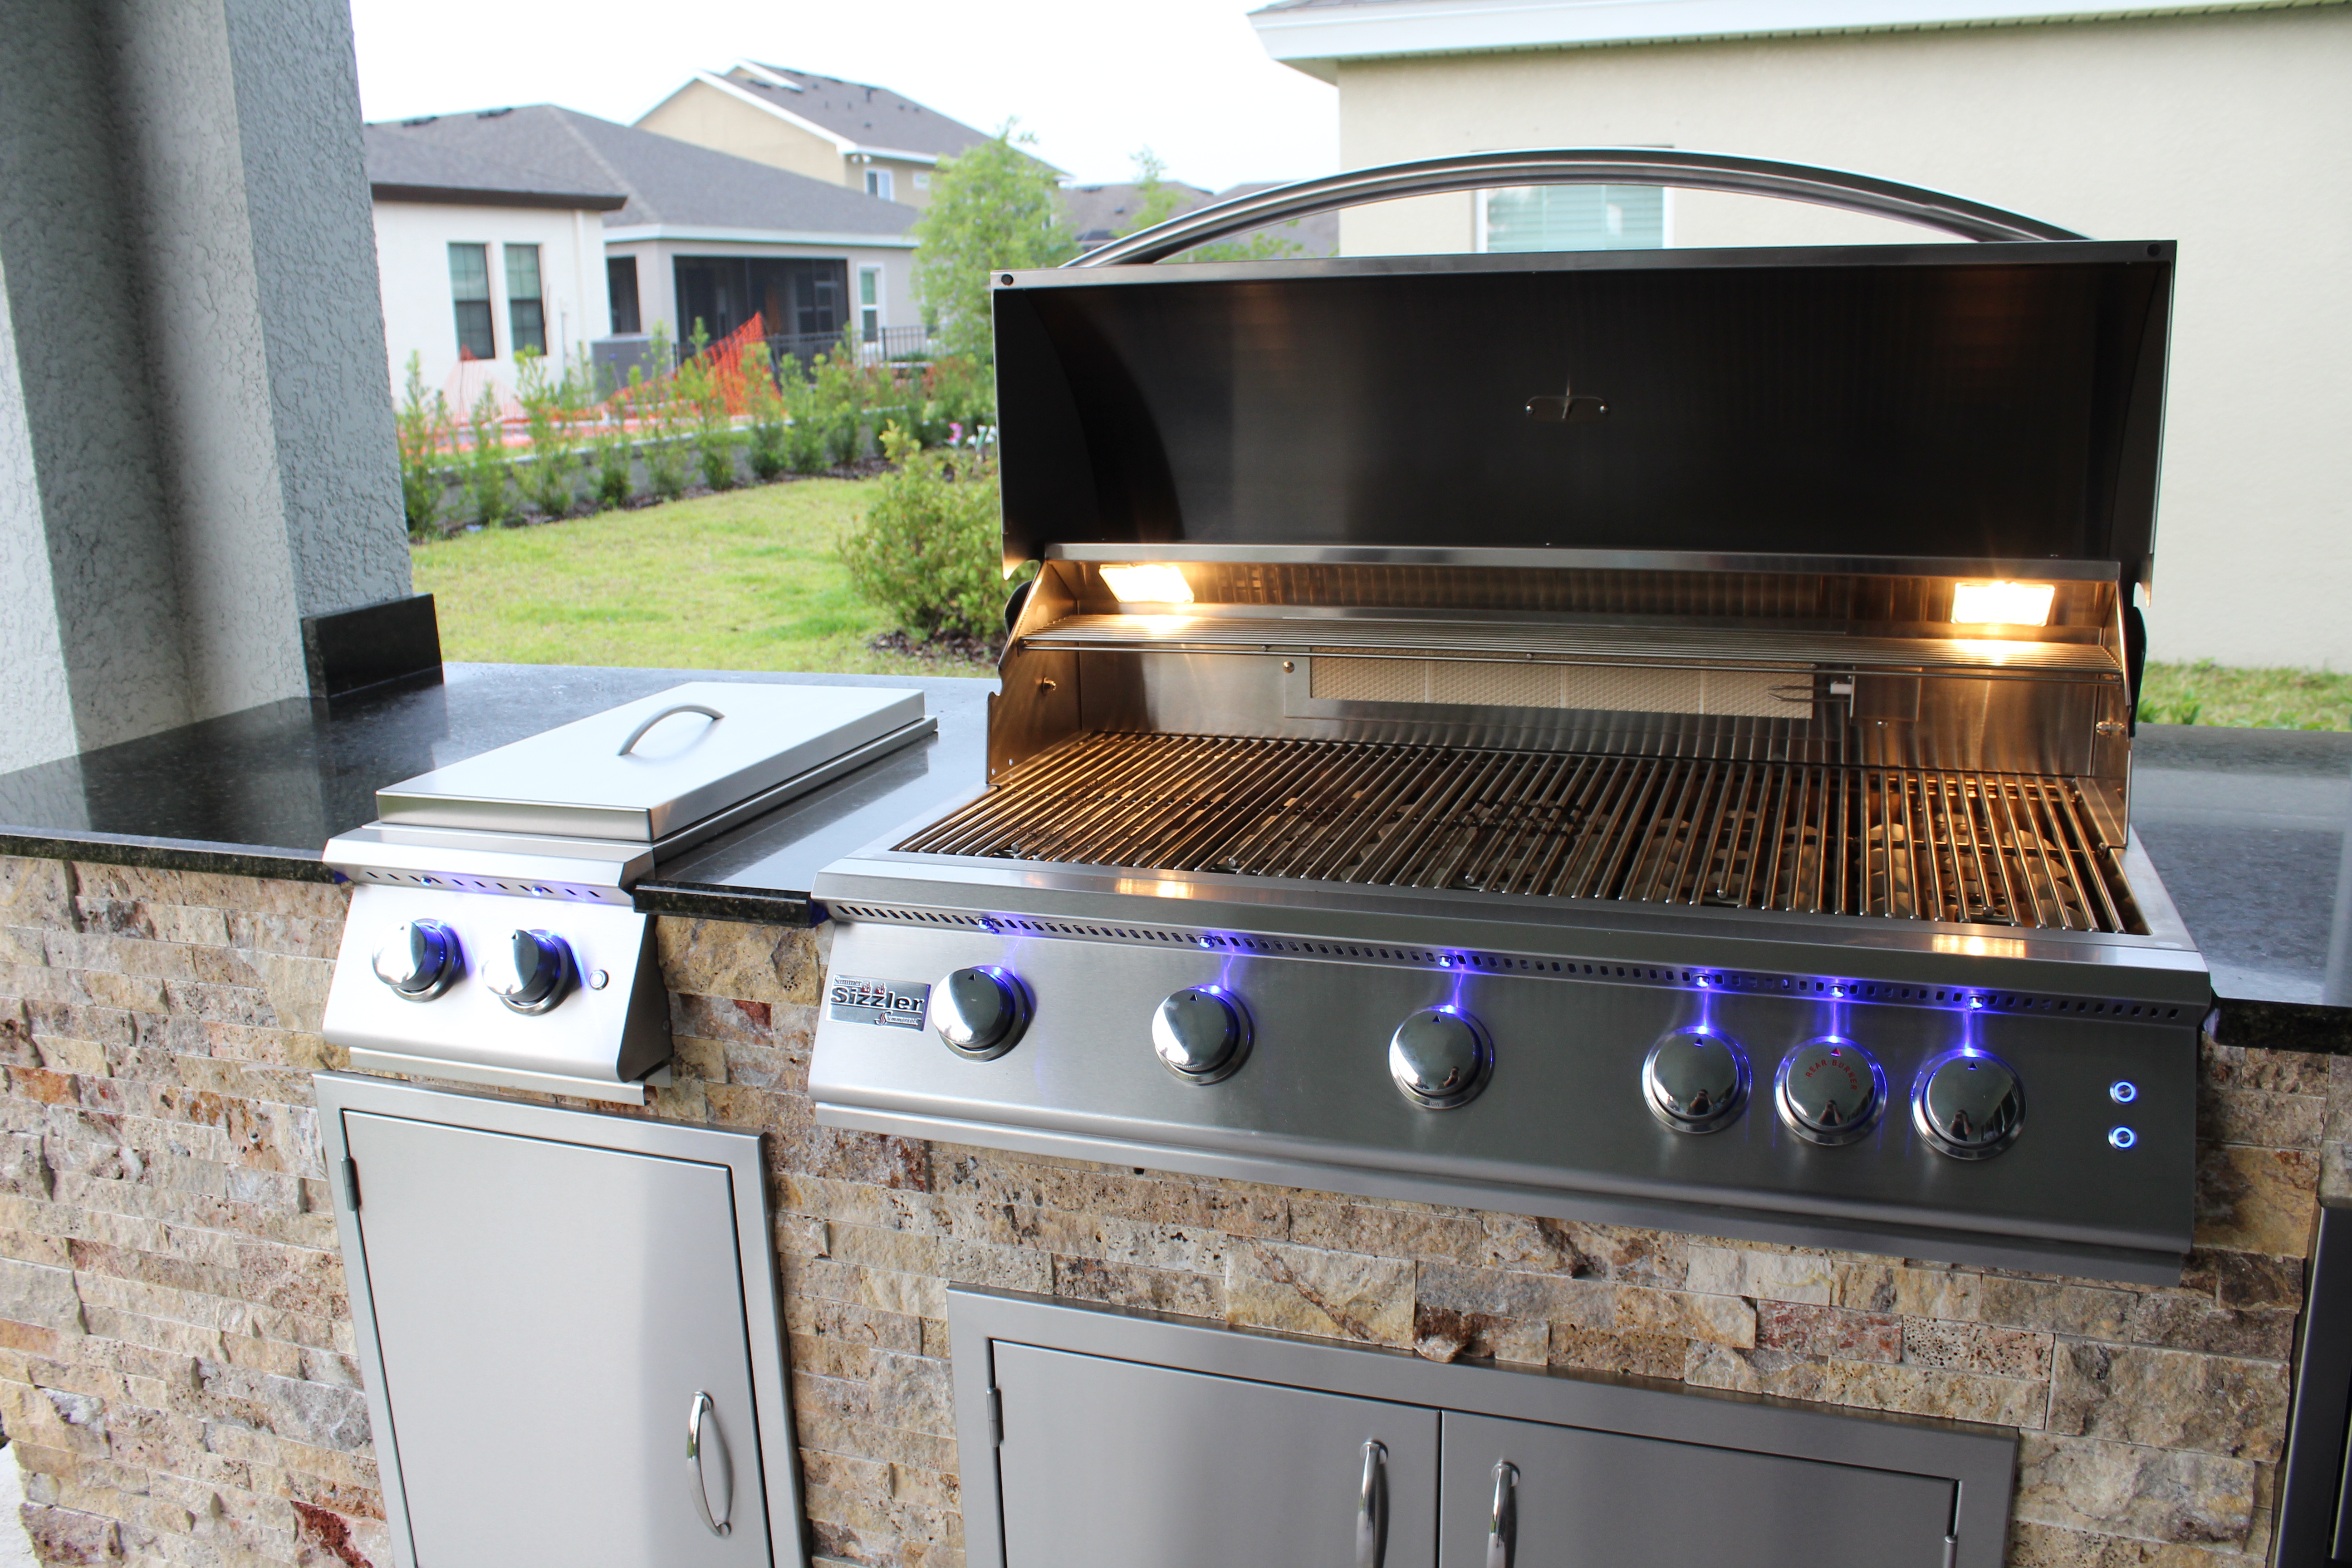 Which Grill Class is Best for Your Yard?